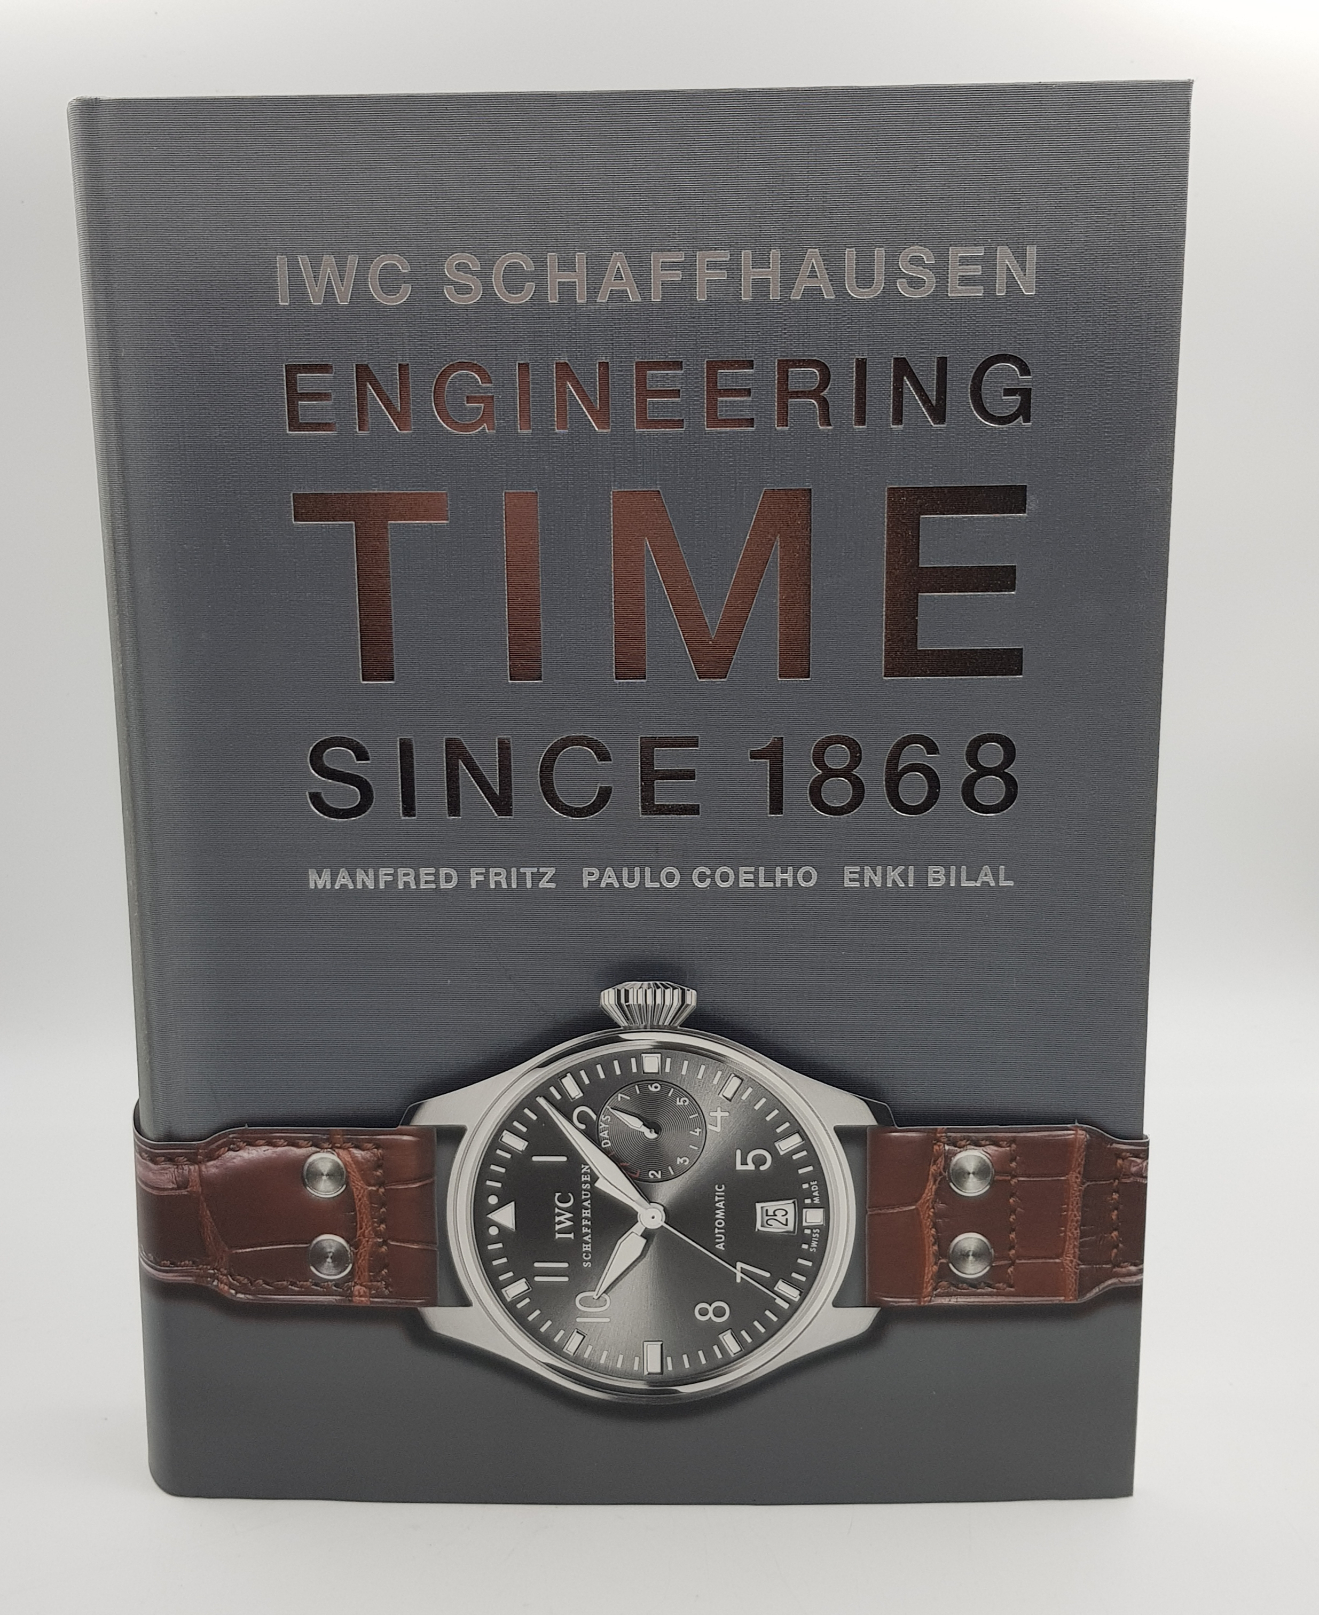 IWC SCHAFFHAUSEN: ENGINEERING TIME SINCE 1868 - HARDCOVER BOOK